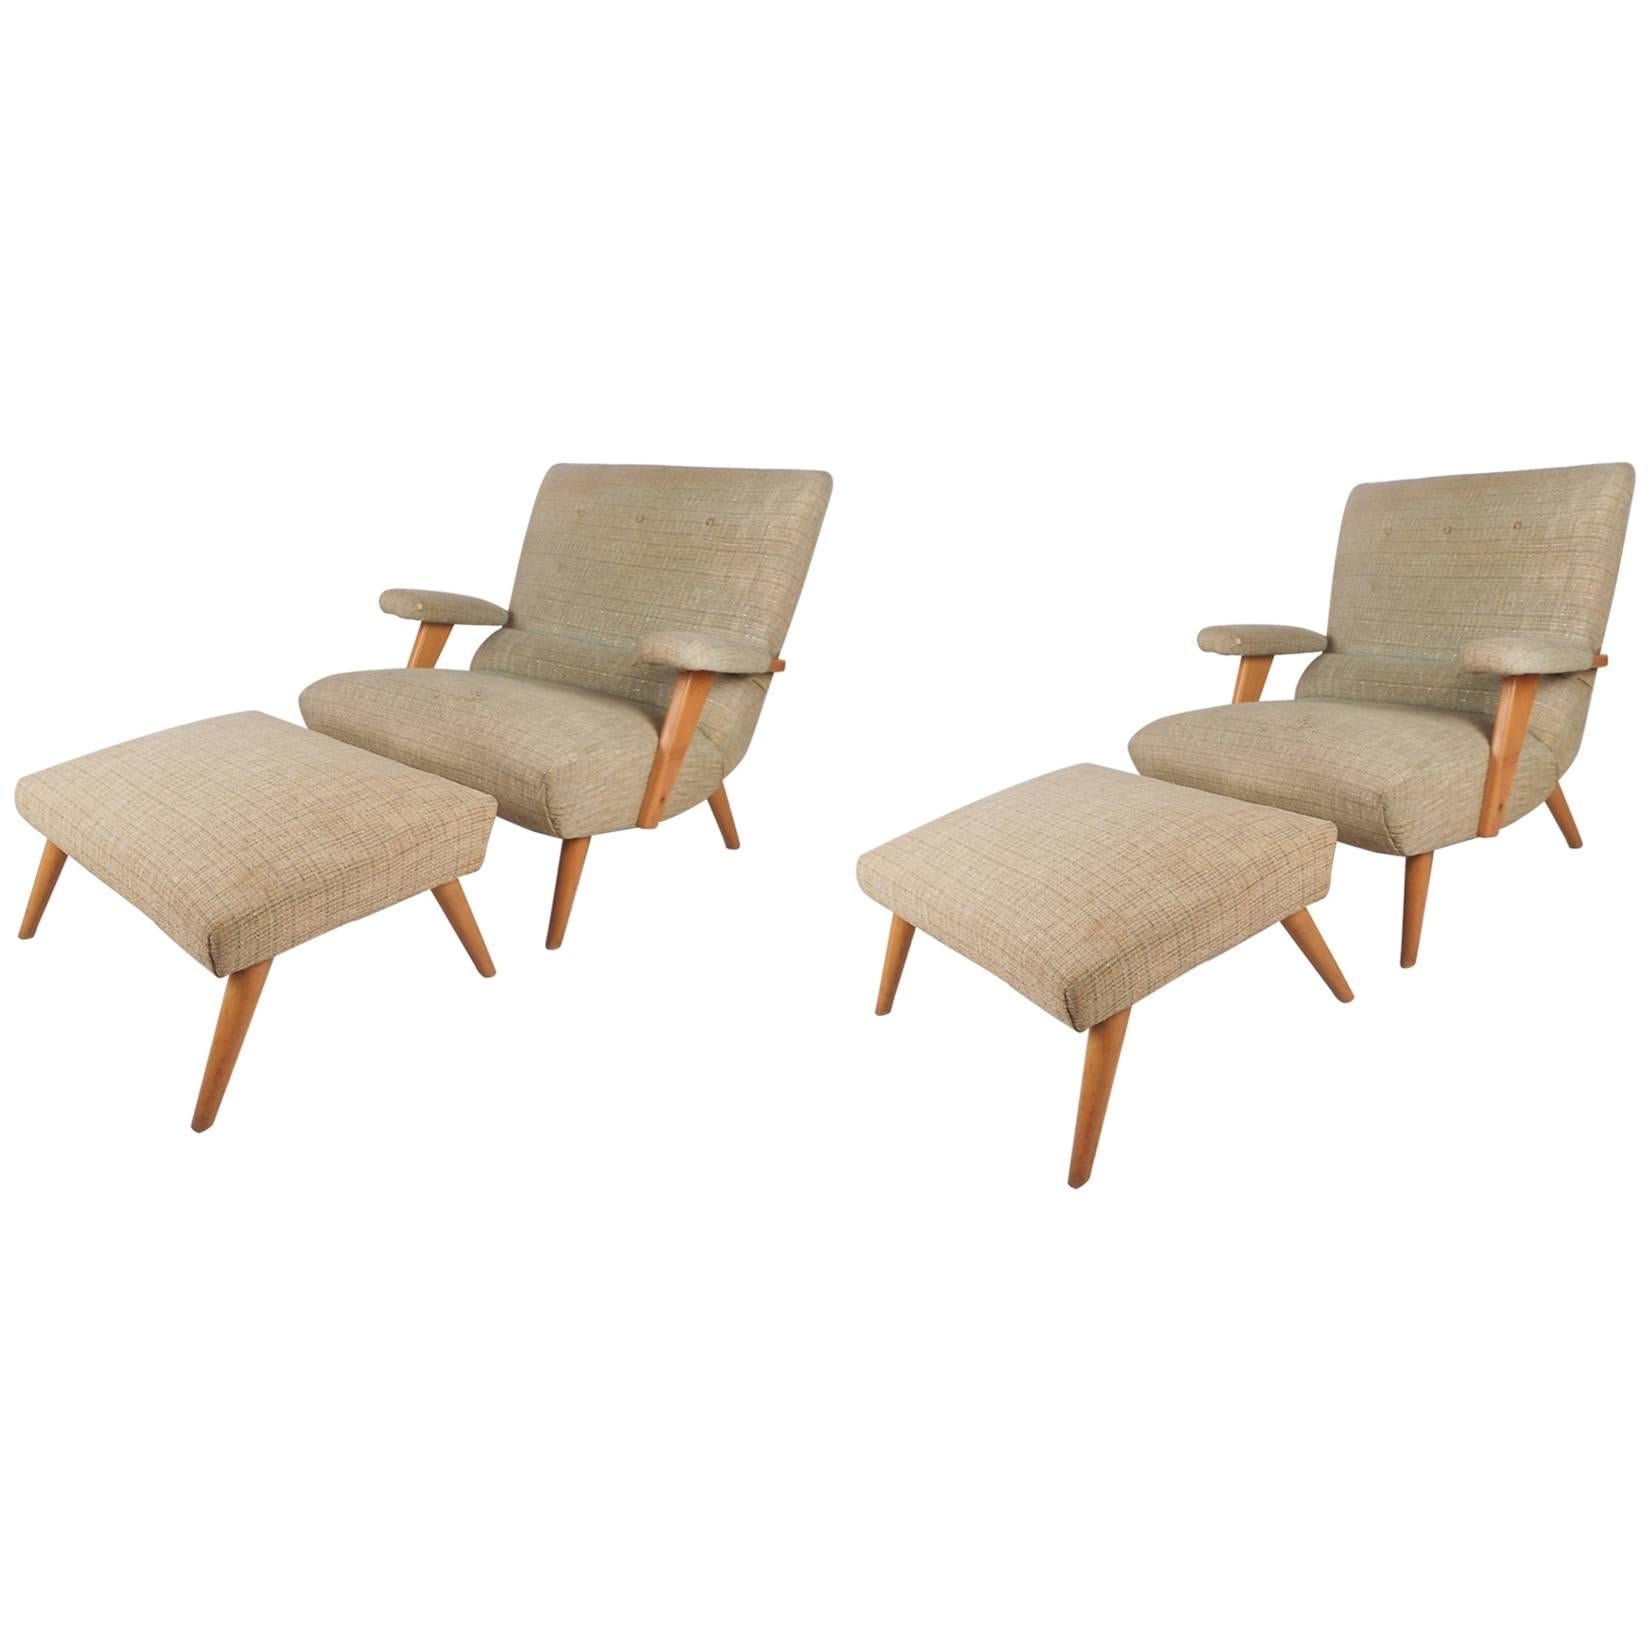 Pair of Mid-Century Modern Selig Lounge Chairs with Ottomans